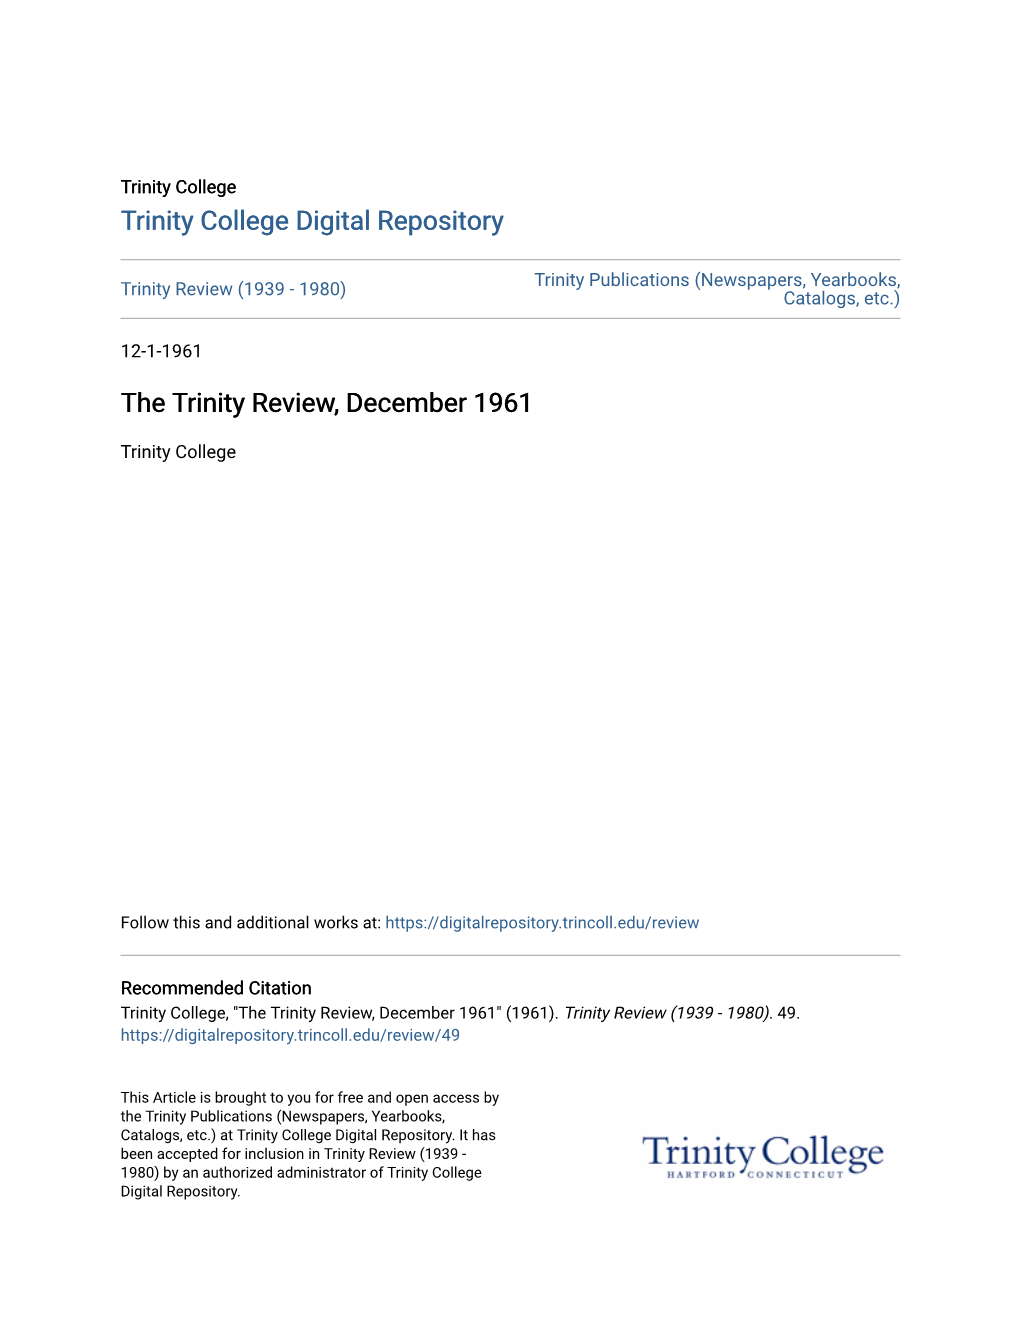 The Trinity Review, December 1961